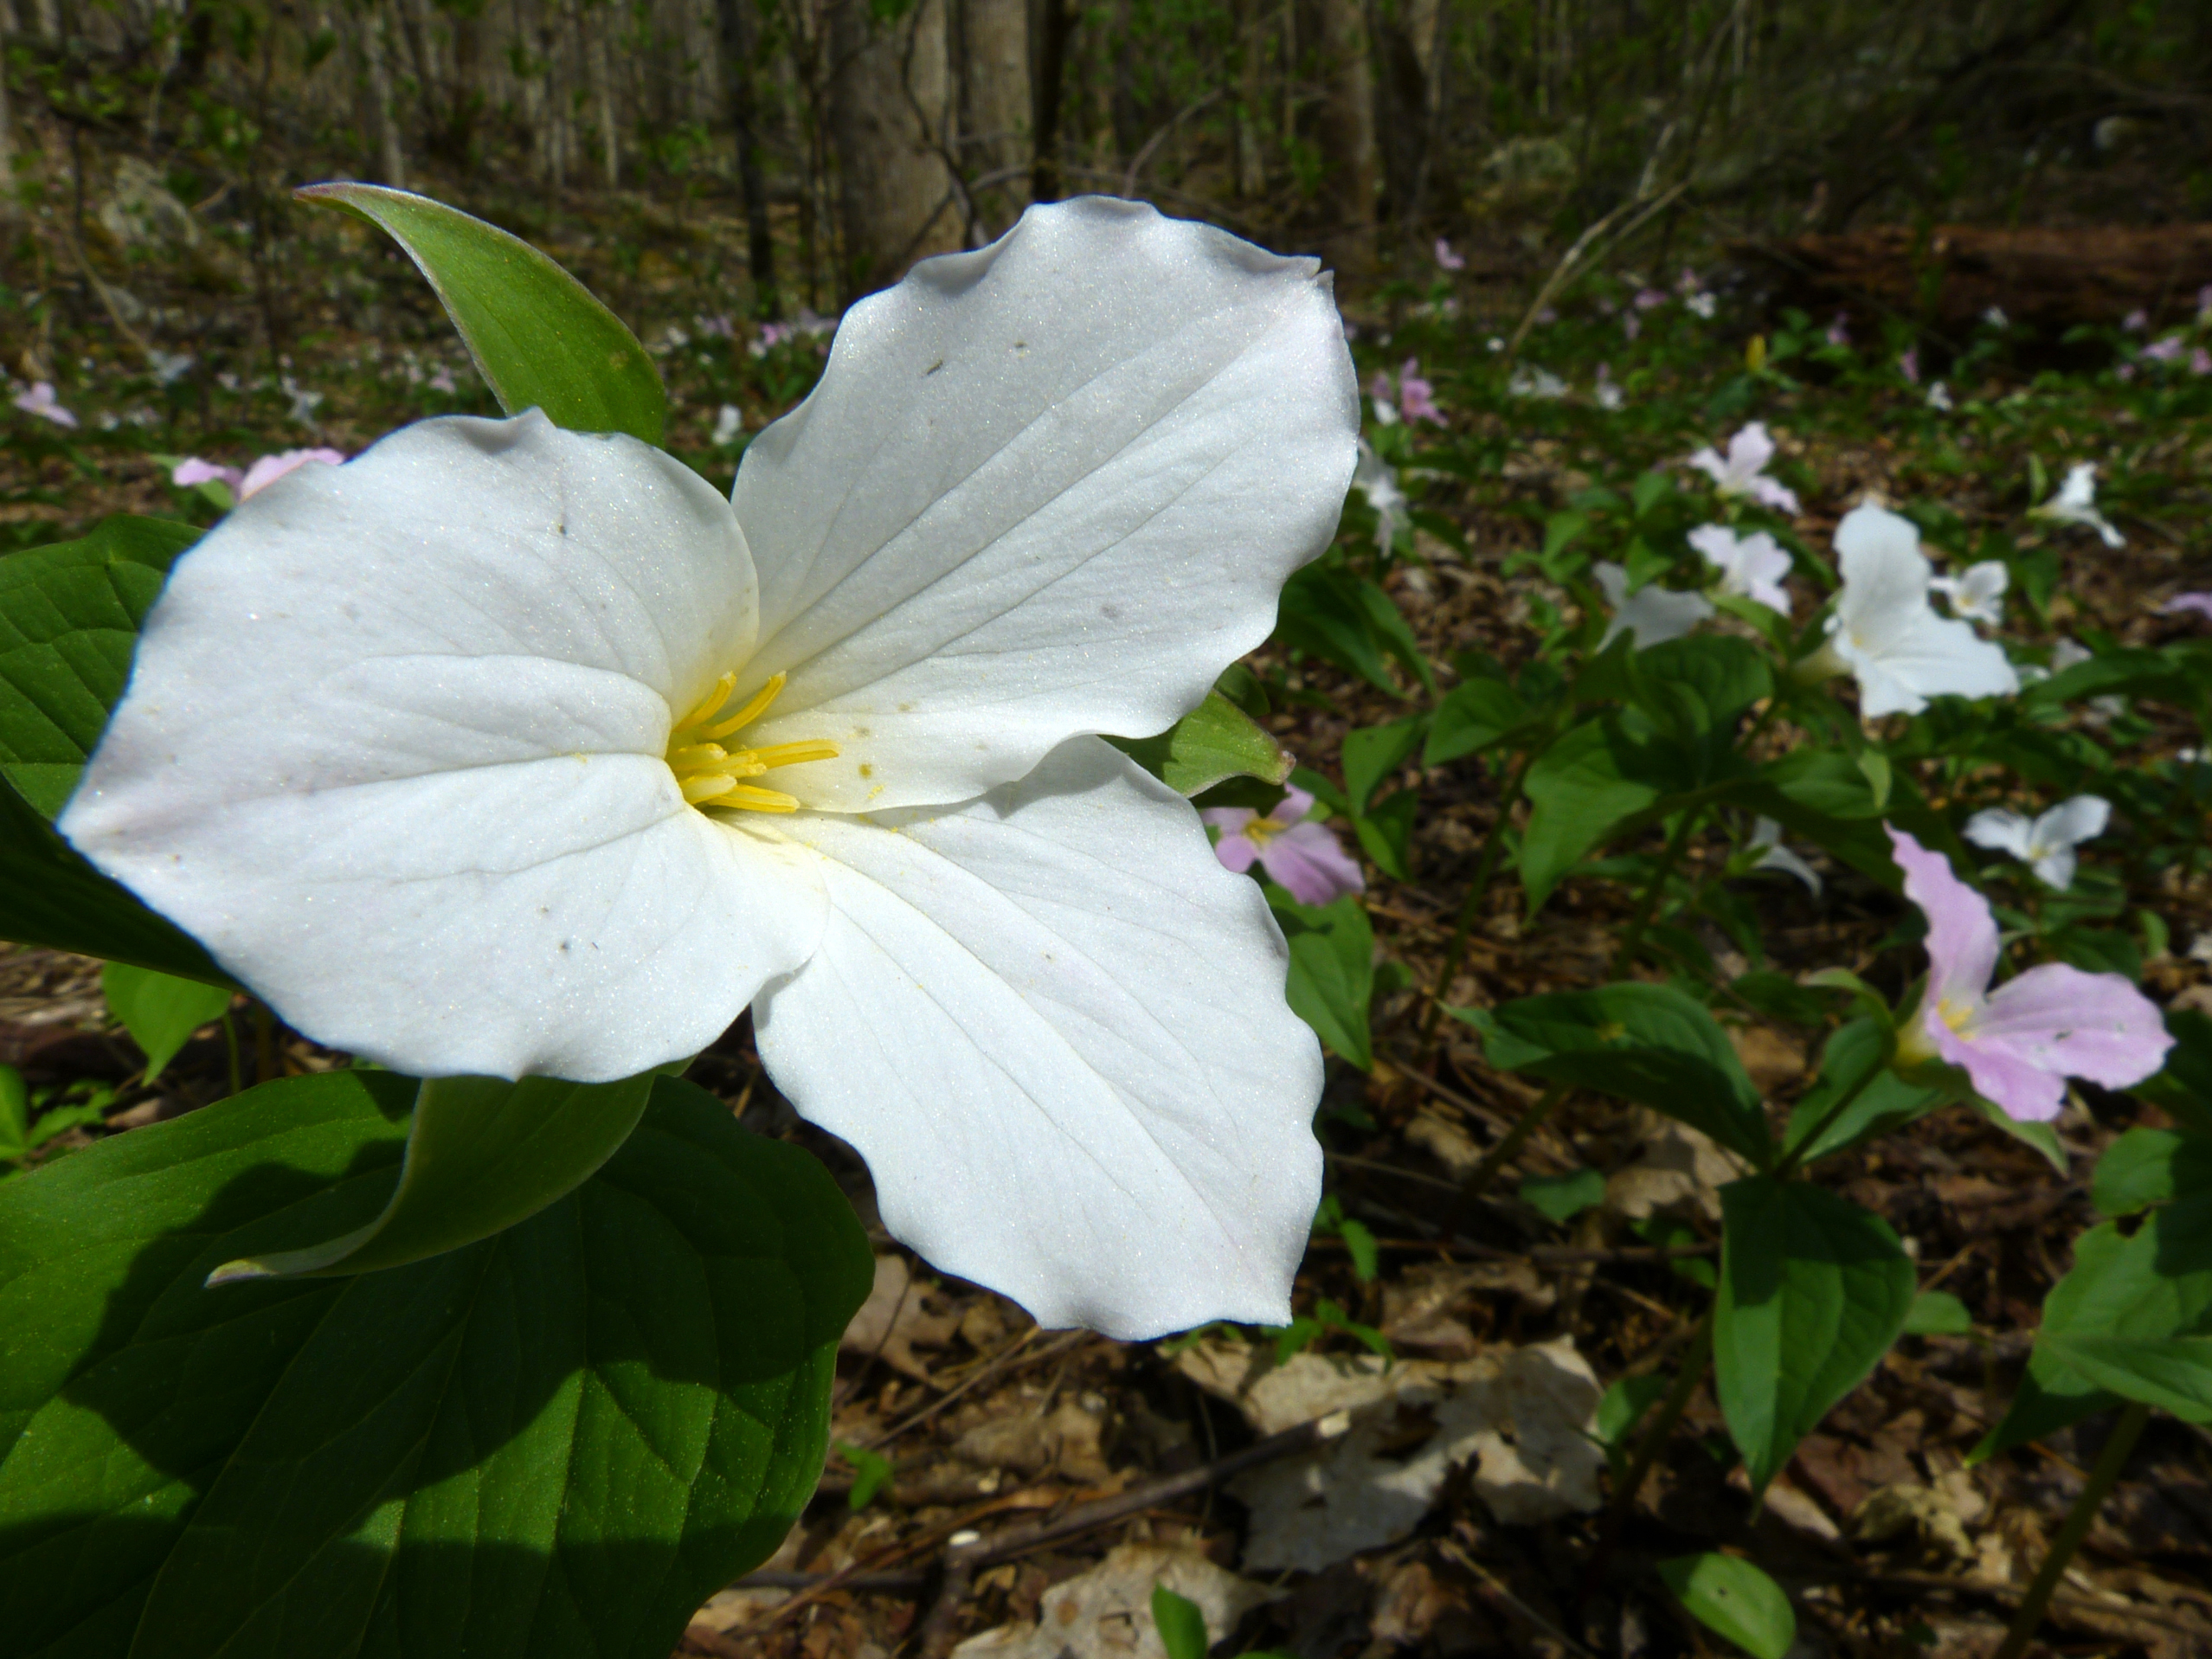 Large-flowered trillium  -  Roaring Fork Motor Nature Trail, Great Smoky Mountains National Park, Tennessee  